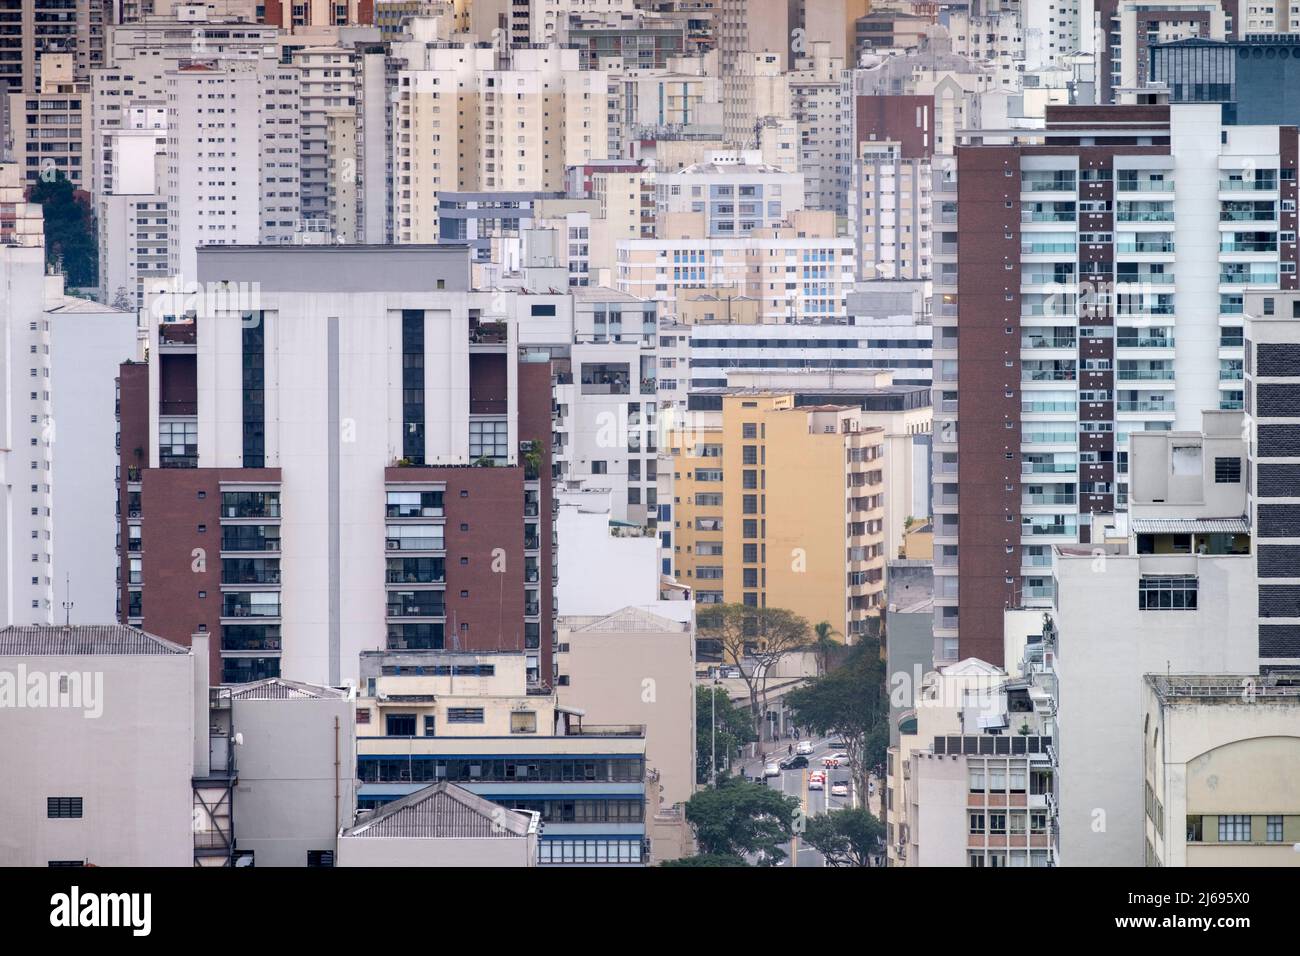 Crowded concrete apartment blocks and office buildings, Sao Paulo, Brazil Stock Photo